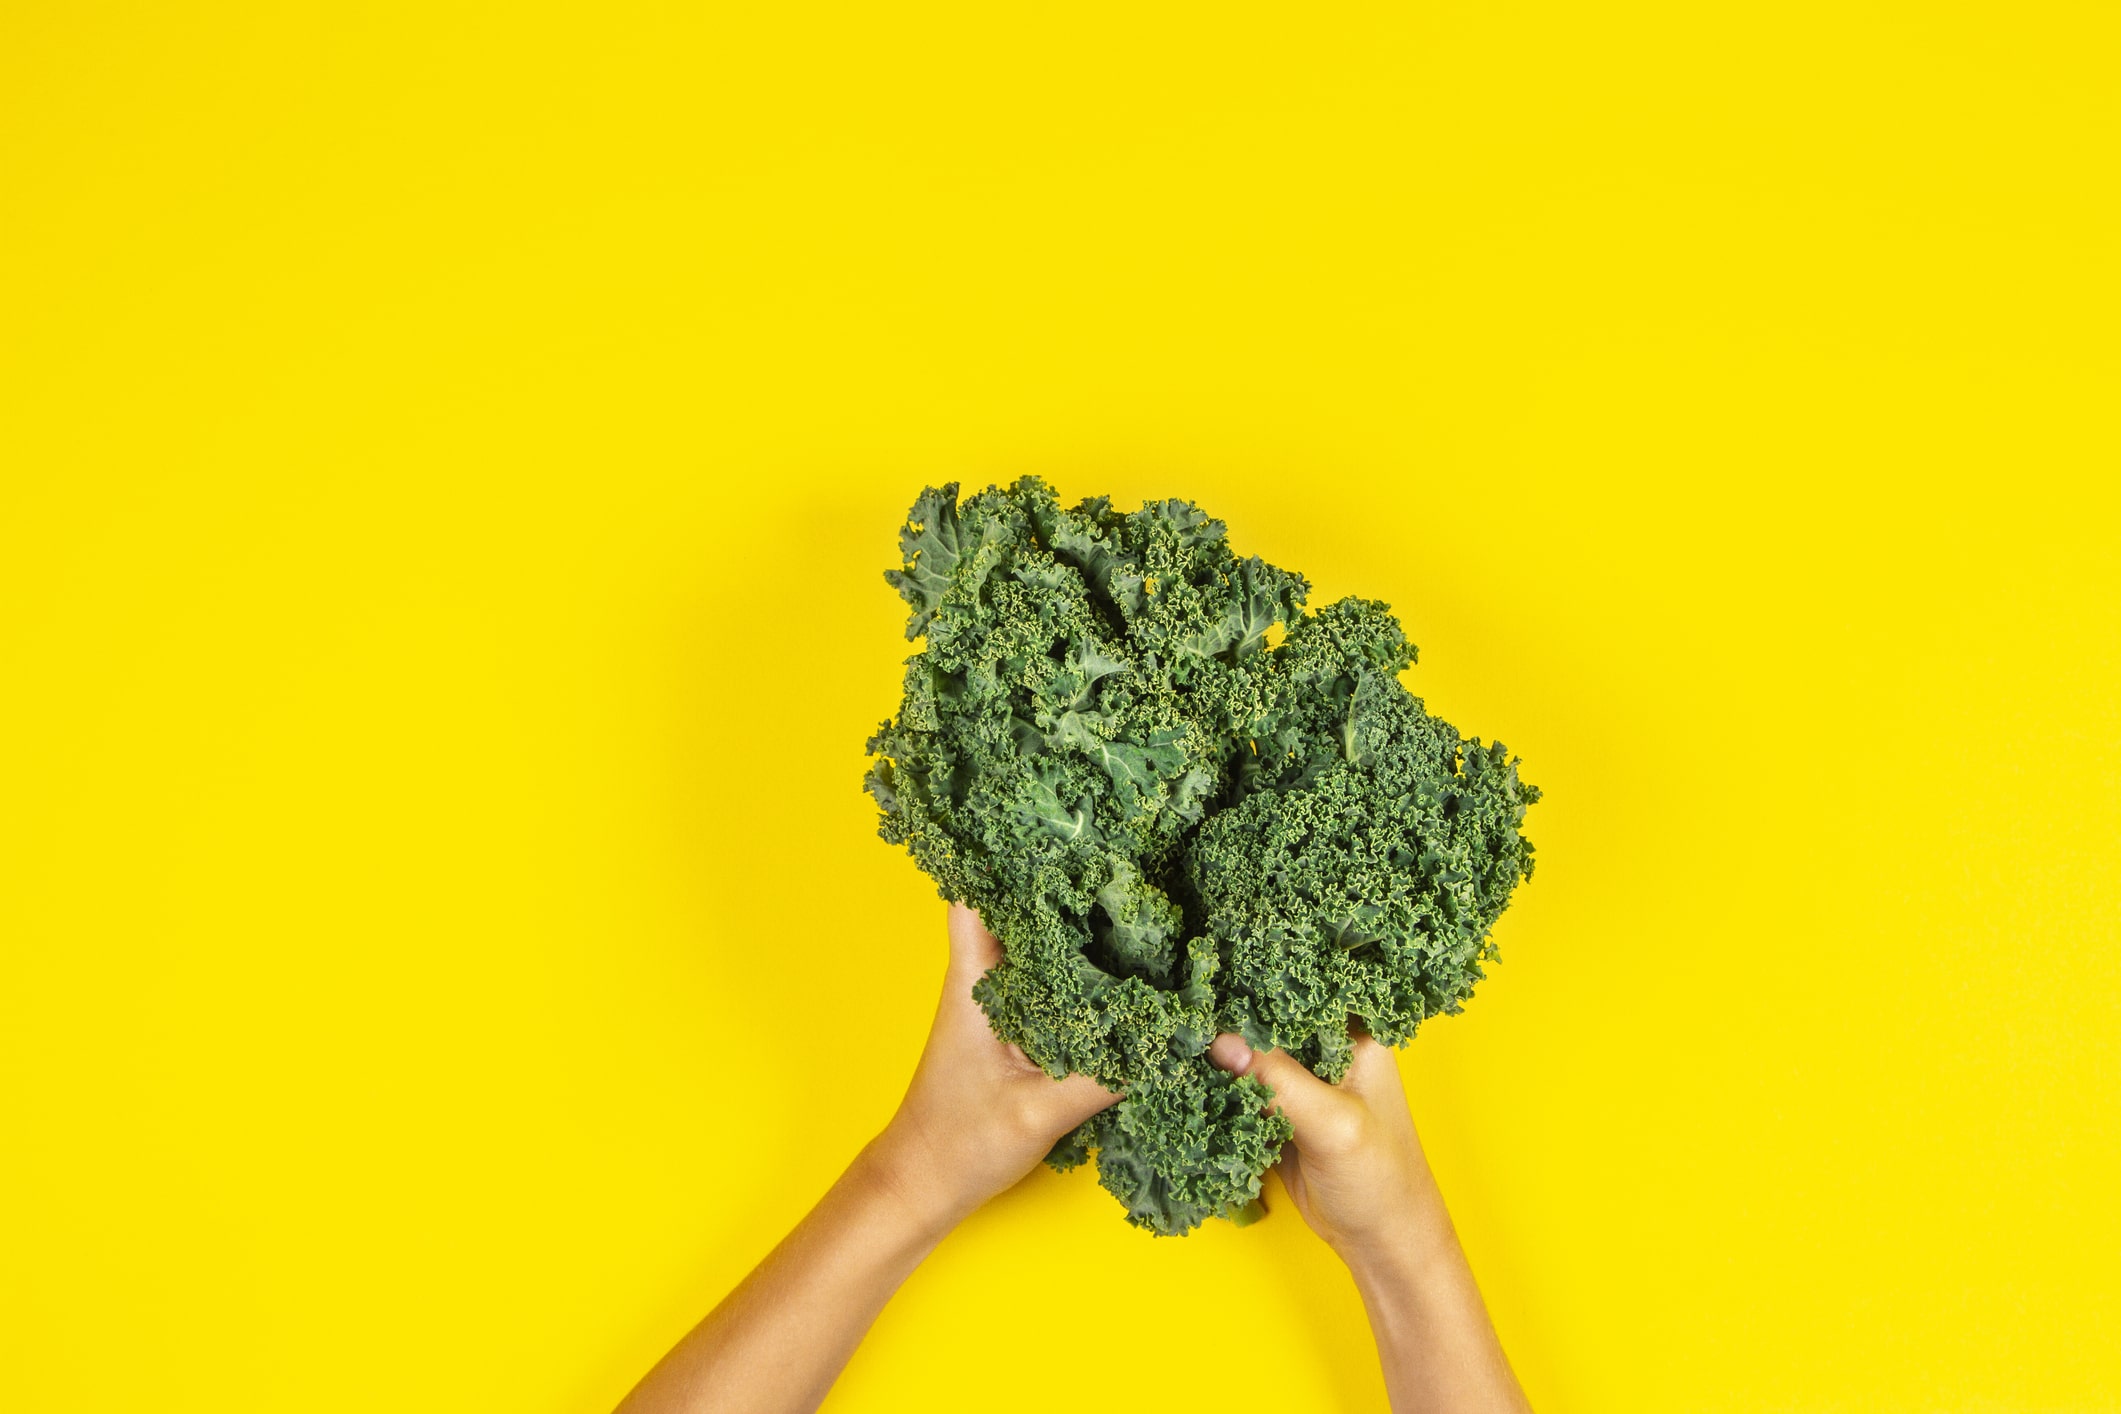 Woman Hands With Healthy Vegetables, Fresh Kale Leaves.